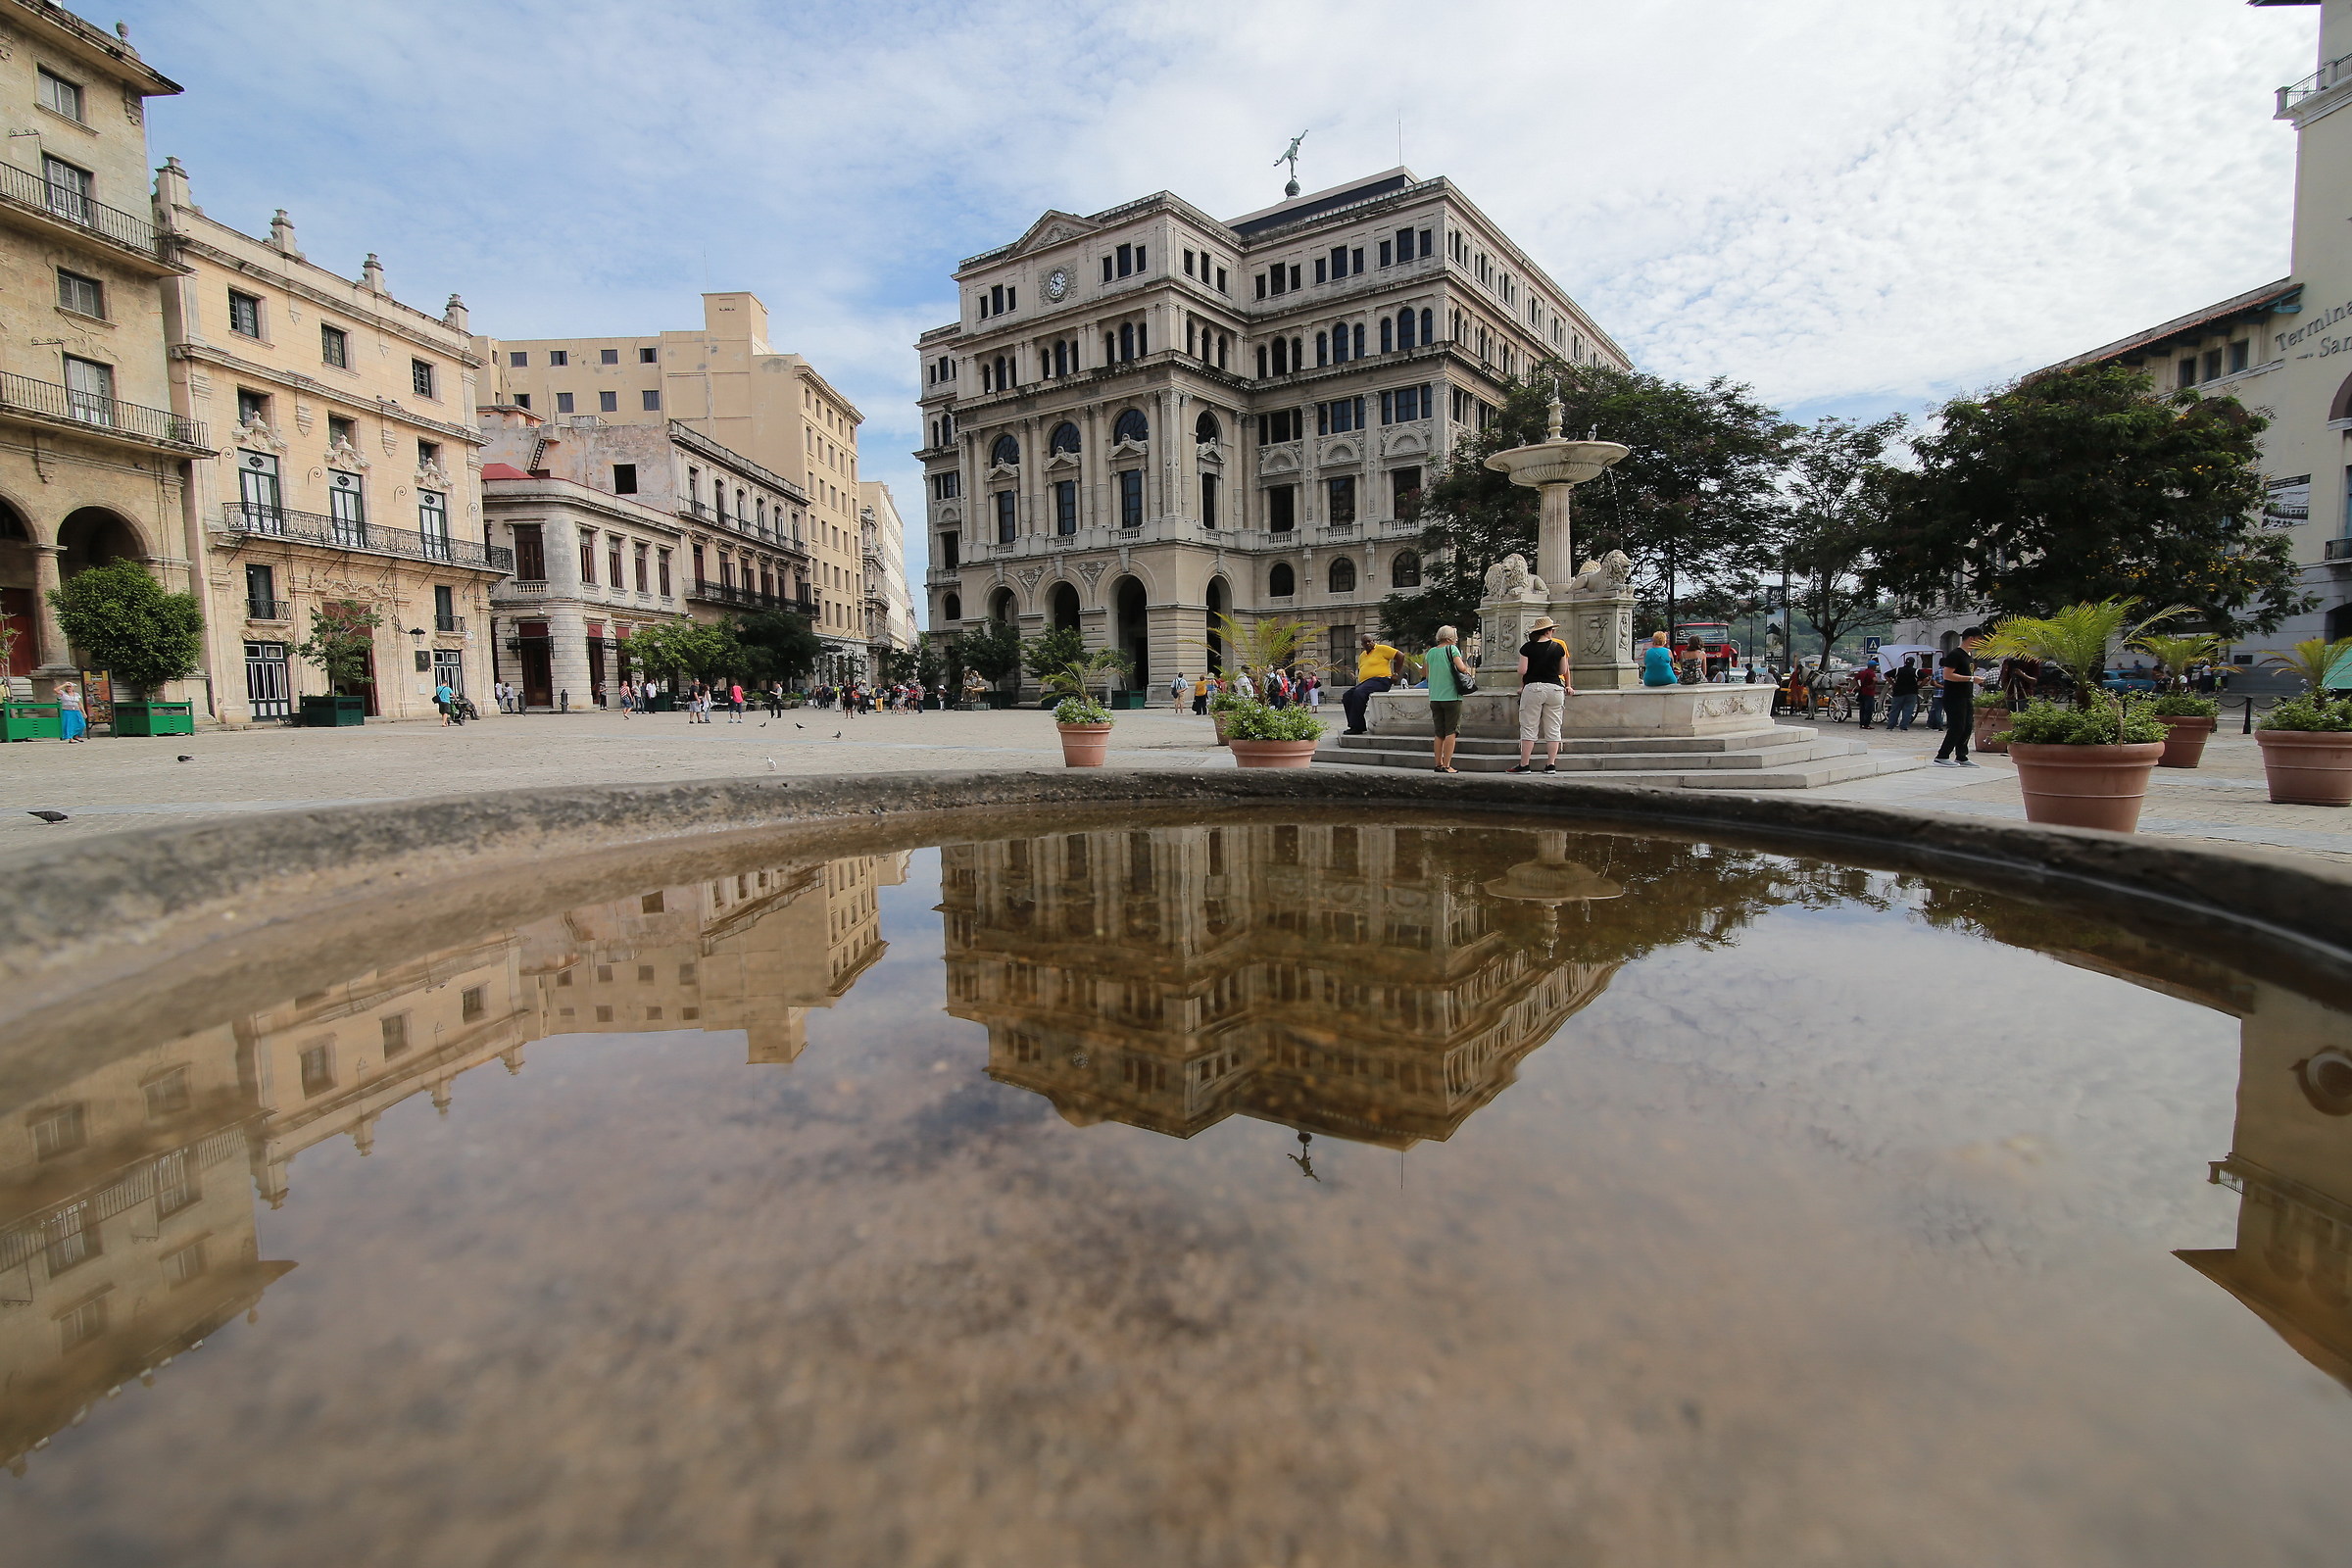 Reflections in the square...